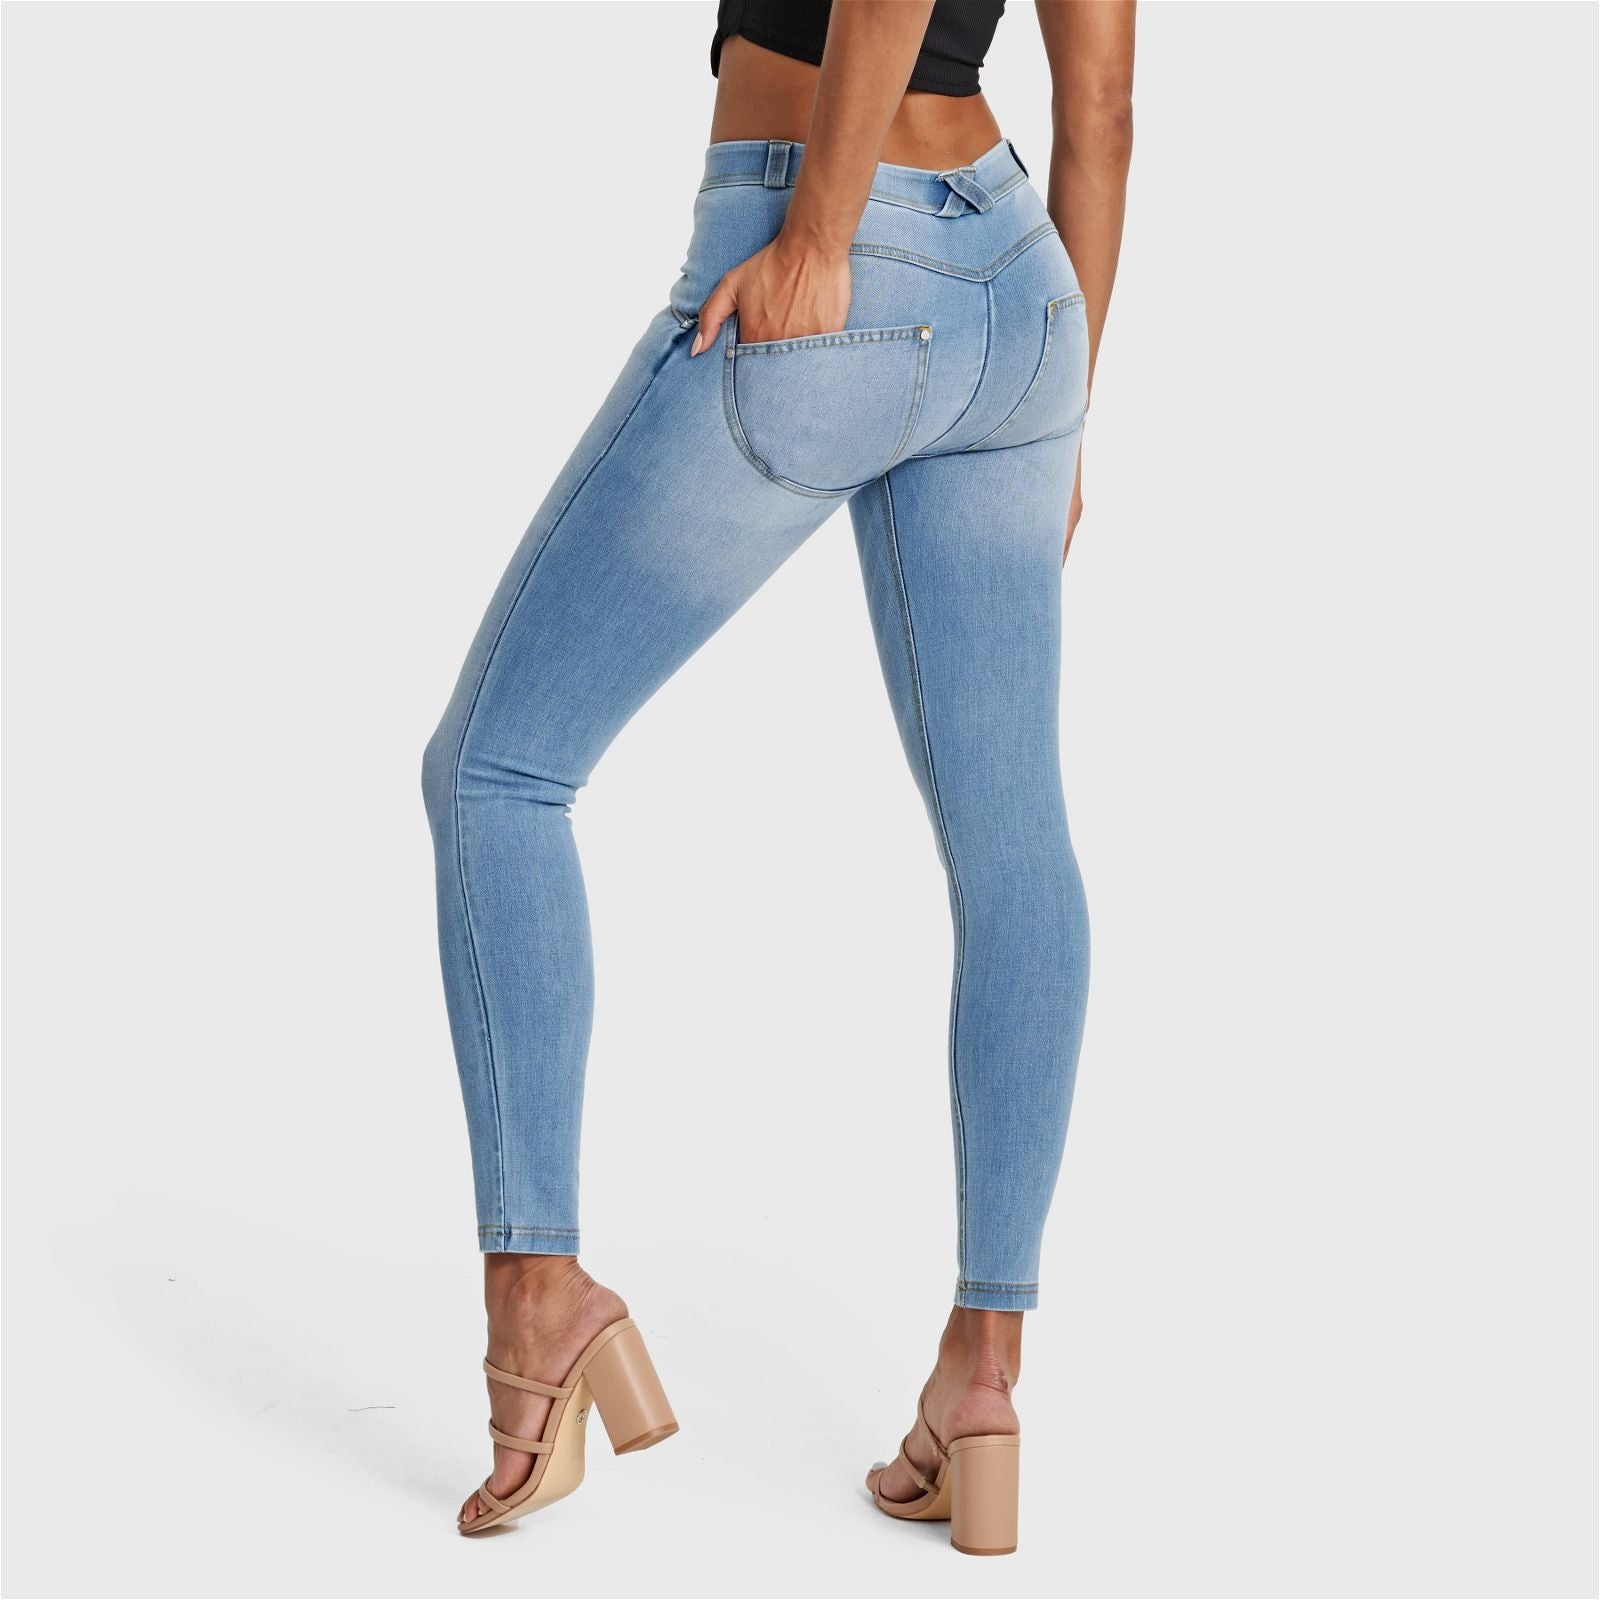 WR.UP® SNUG Jeans - Mid Rise - Full Length - Light Blue + Yellow Stitching 3